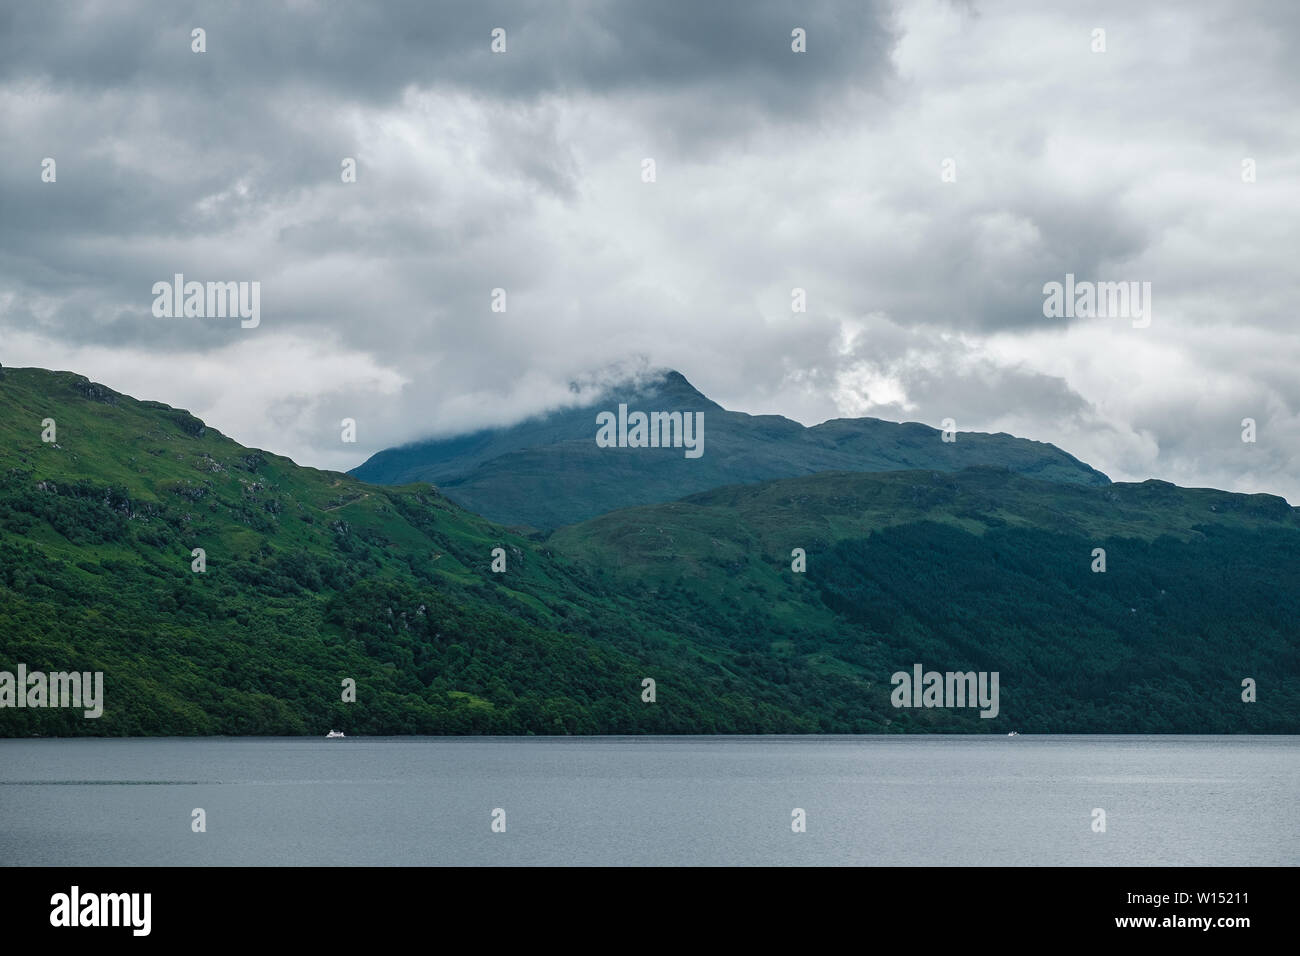 Scottish landscape with lake view and clouds covered green mountains. Summer 2019. Loch Lomond, Scotland Stock Photo